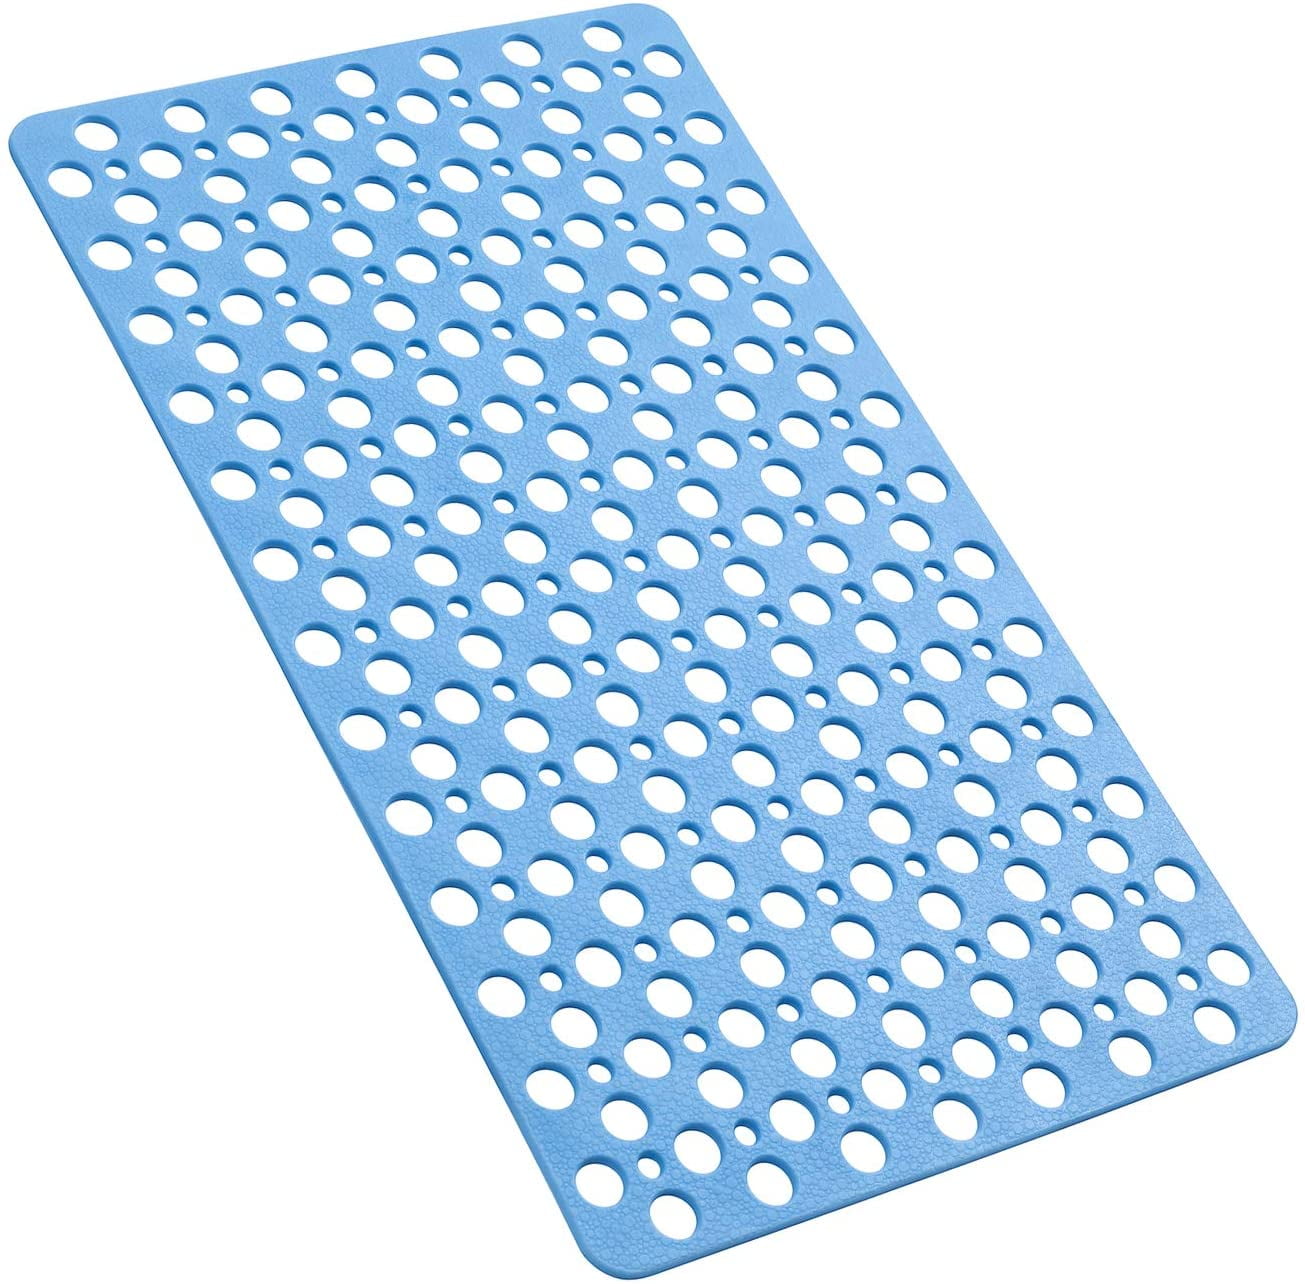 Pinzz Vinyl Non-Slip Bathtub Mat Anti-Bacterial Shower Mat,Extra Long,100*40CM/16*38, Powerful Suction Cup Gripping,Machine Washable